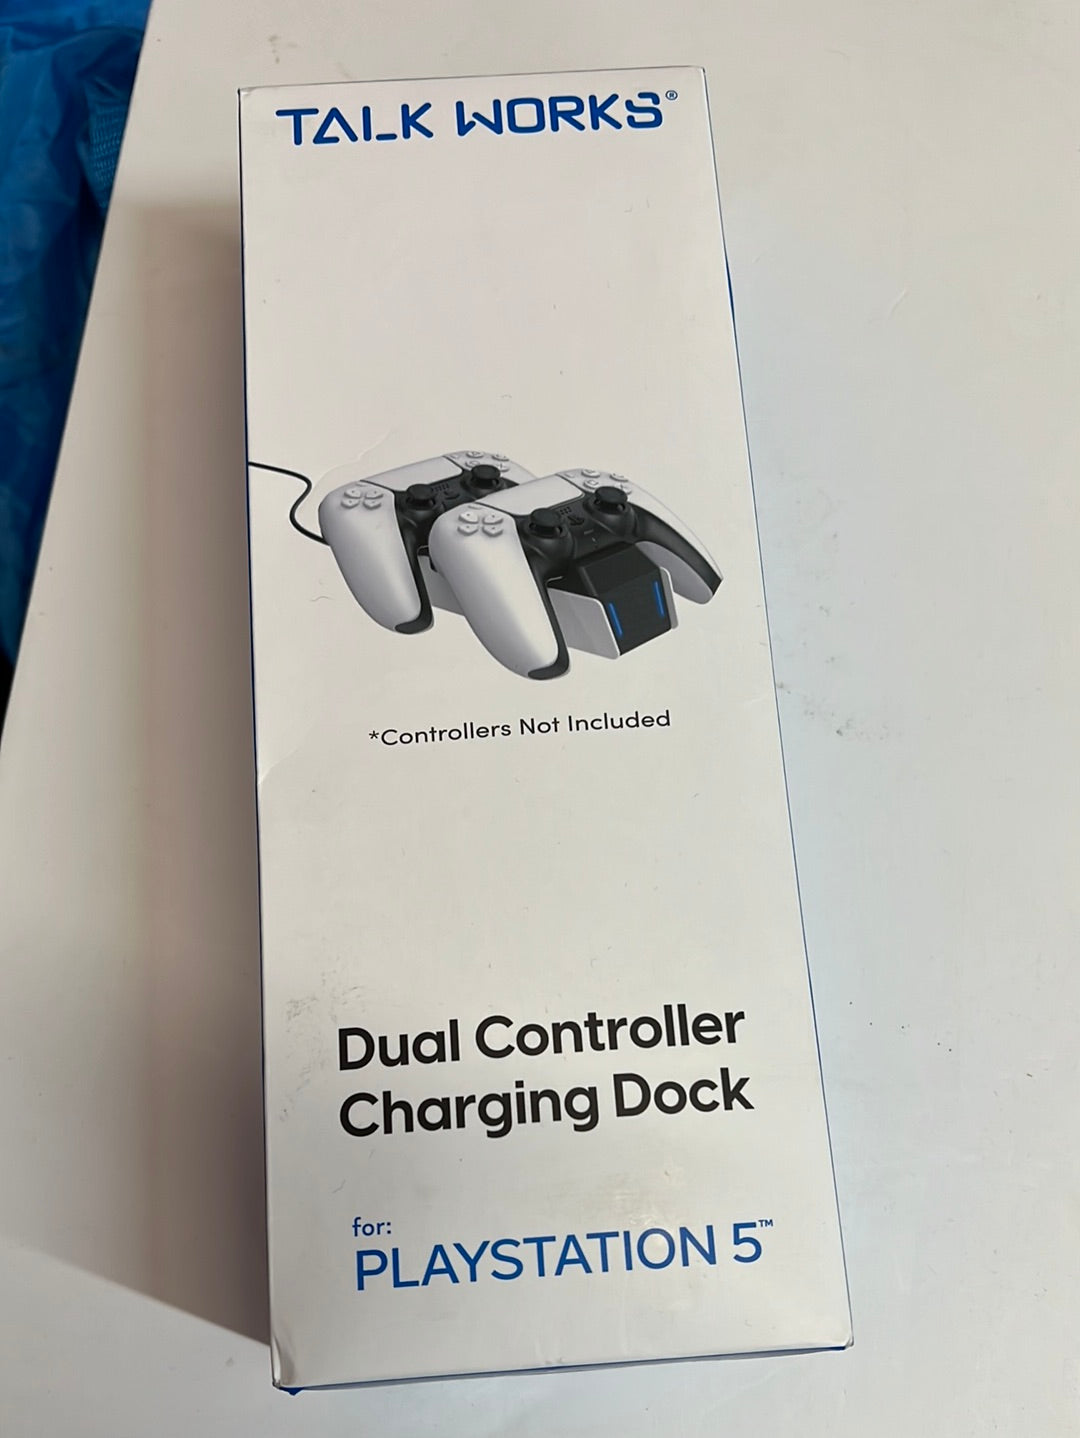 Talk Works Dual Controller Charging Dock for Playstation 5